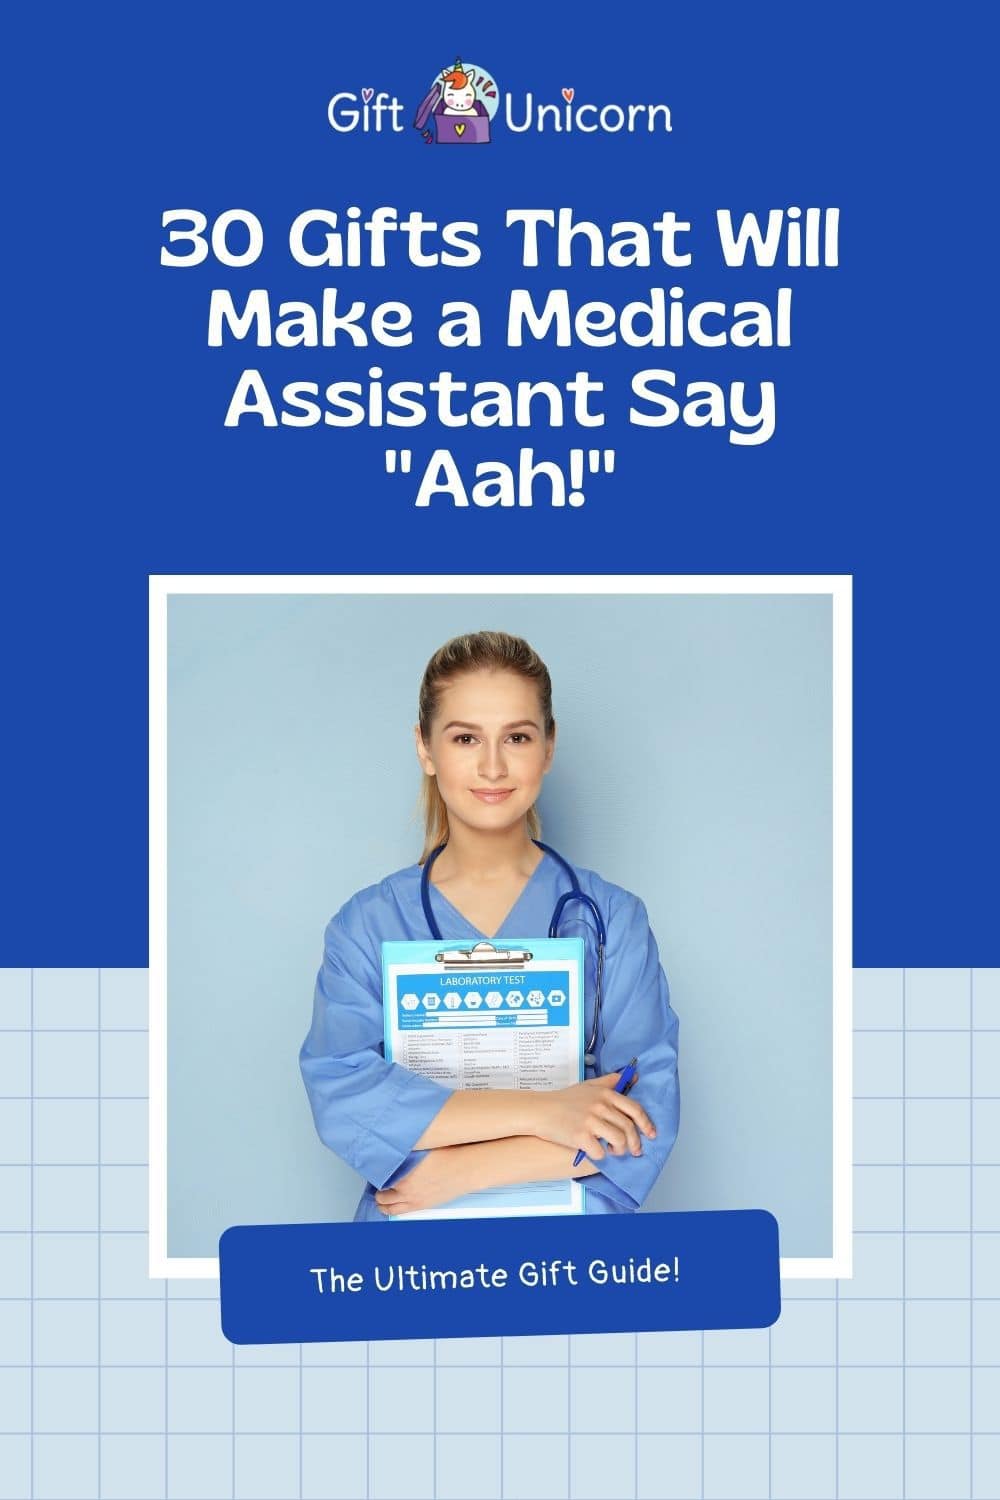 30 gifts for a medical assistant